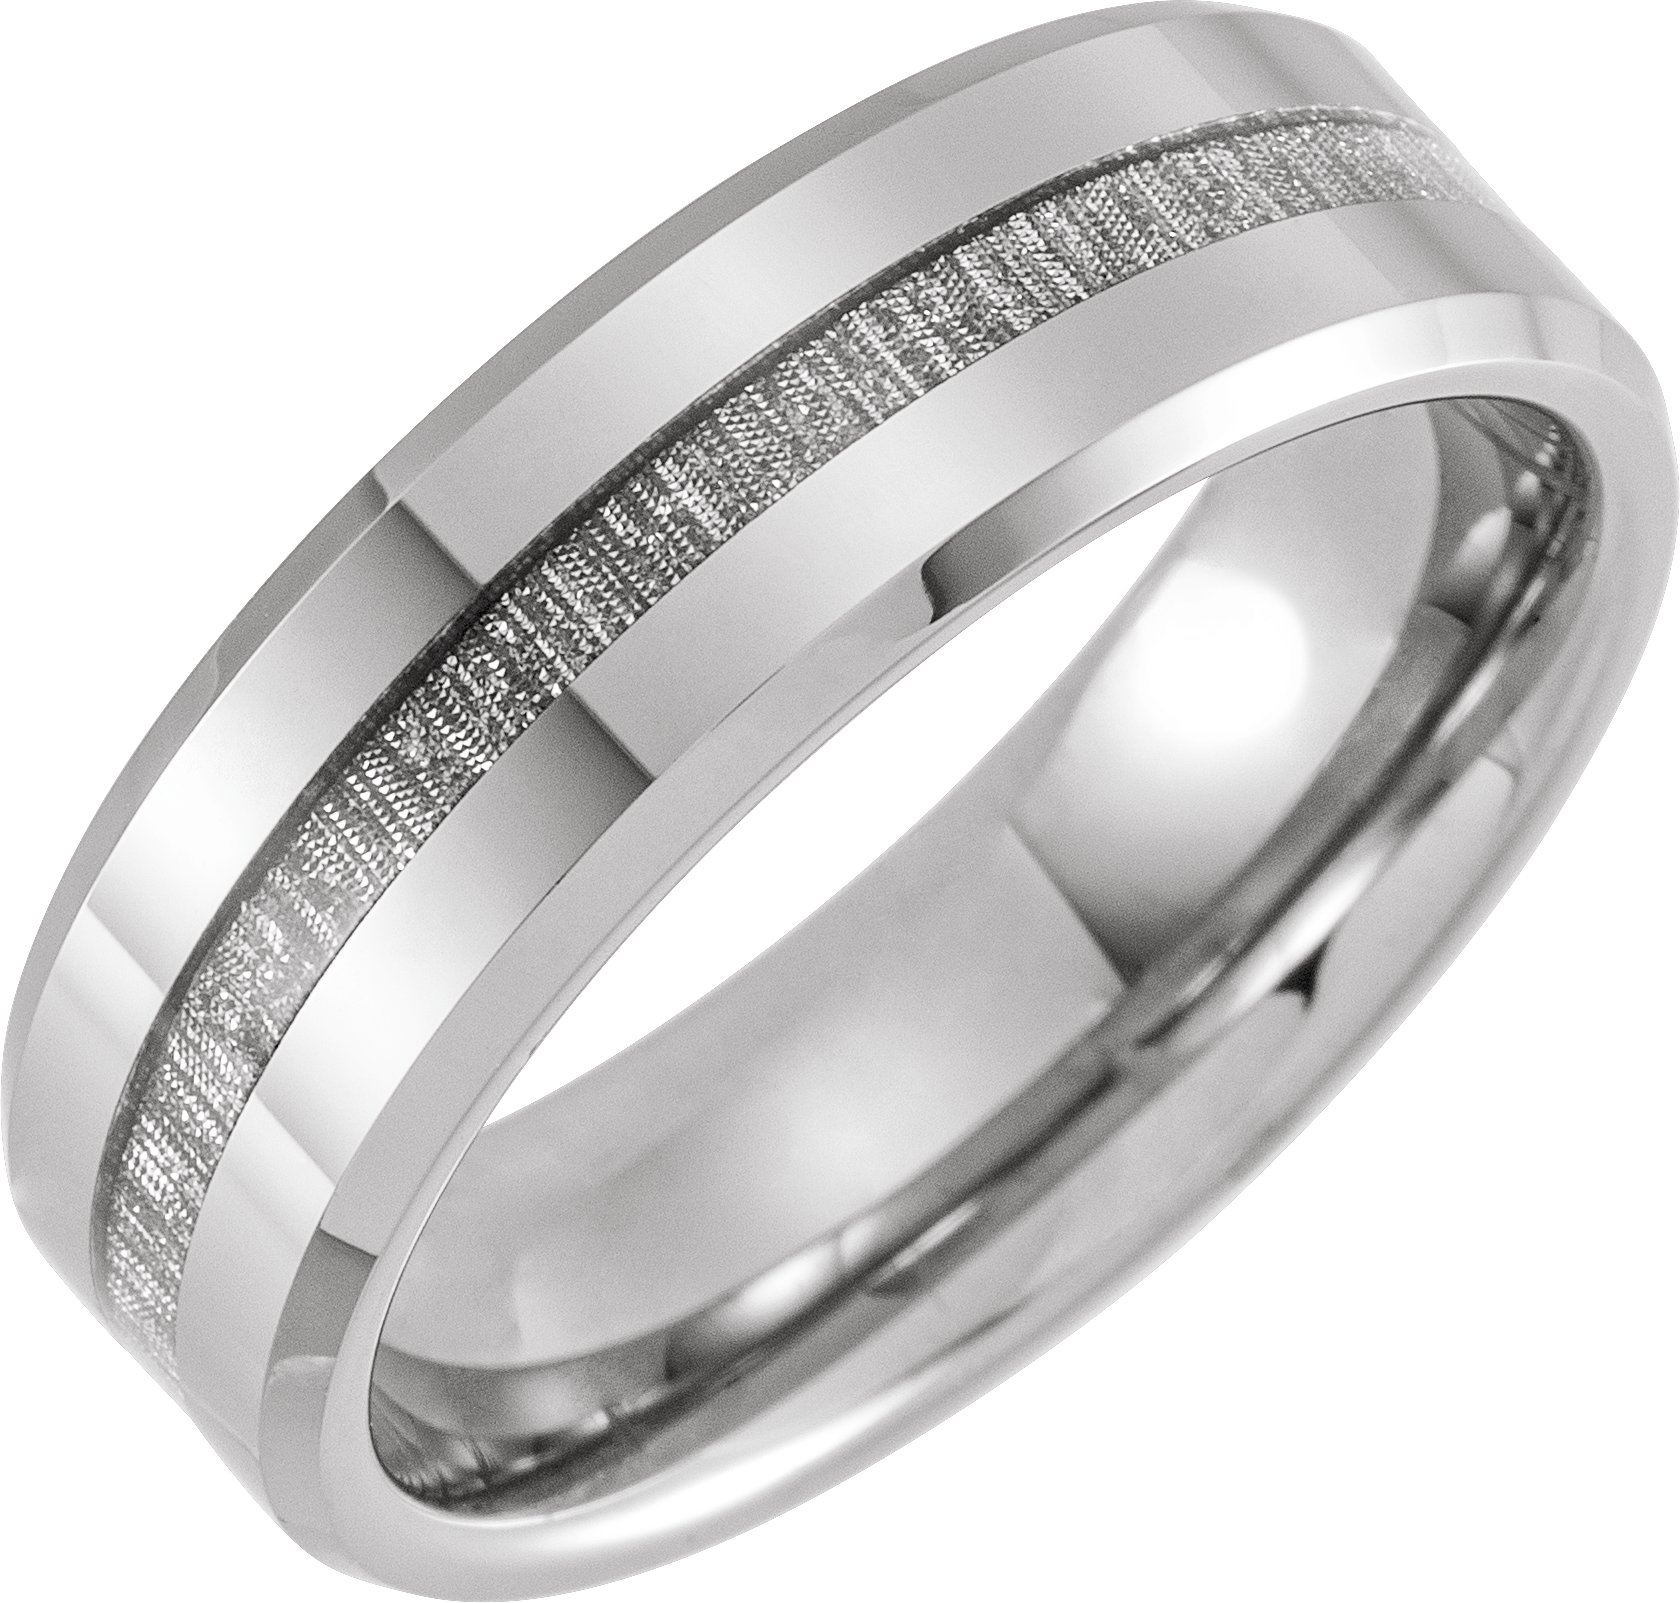 Tungsten 8 mm Beveled Band with Manmade Meteorite Inlay Size 7.5